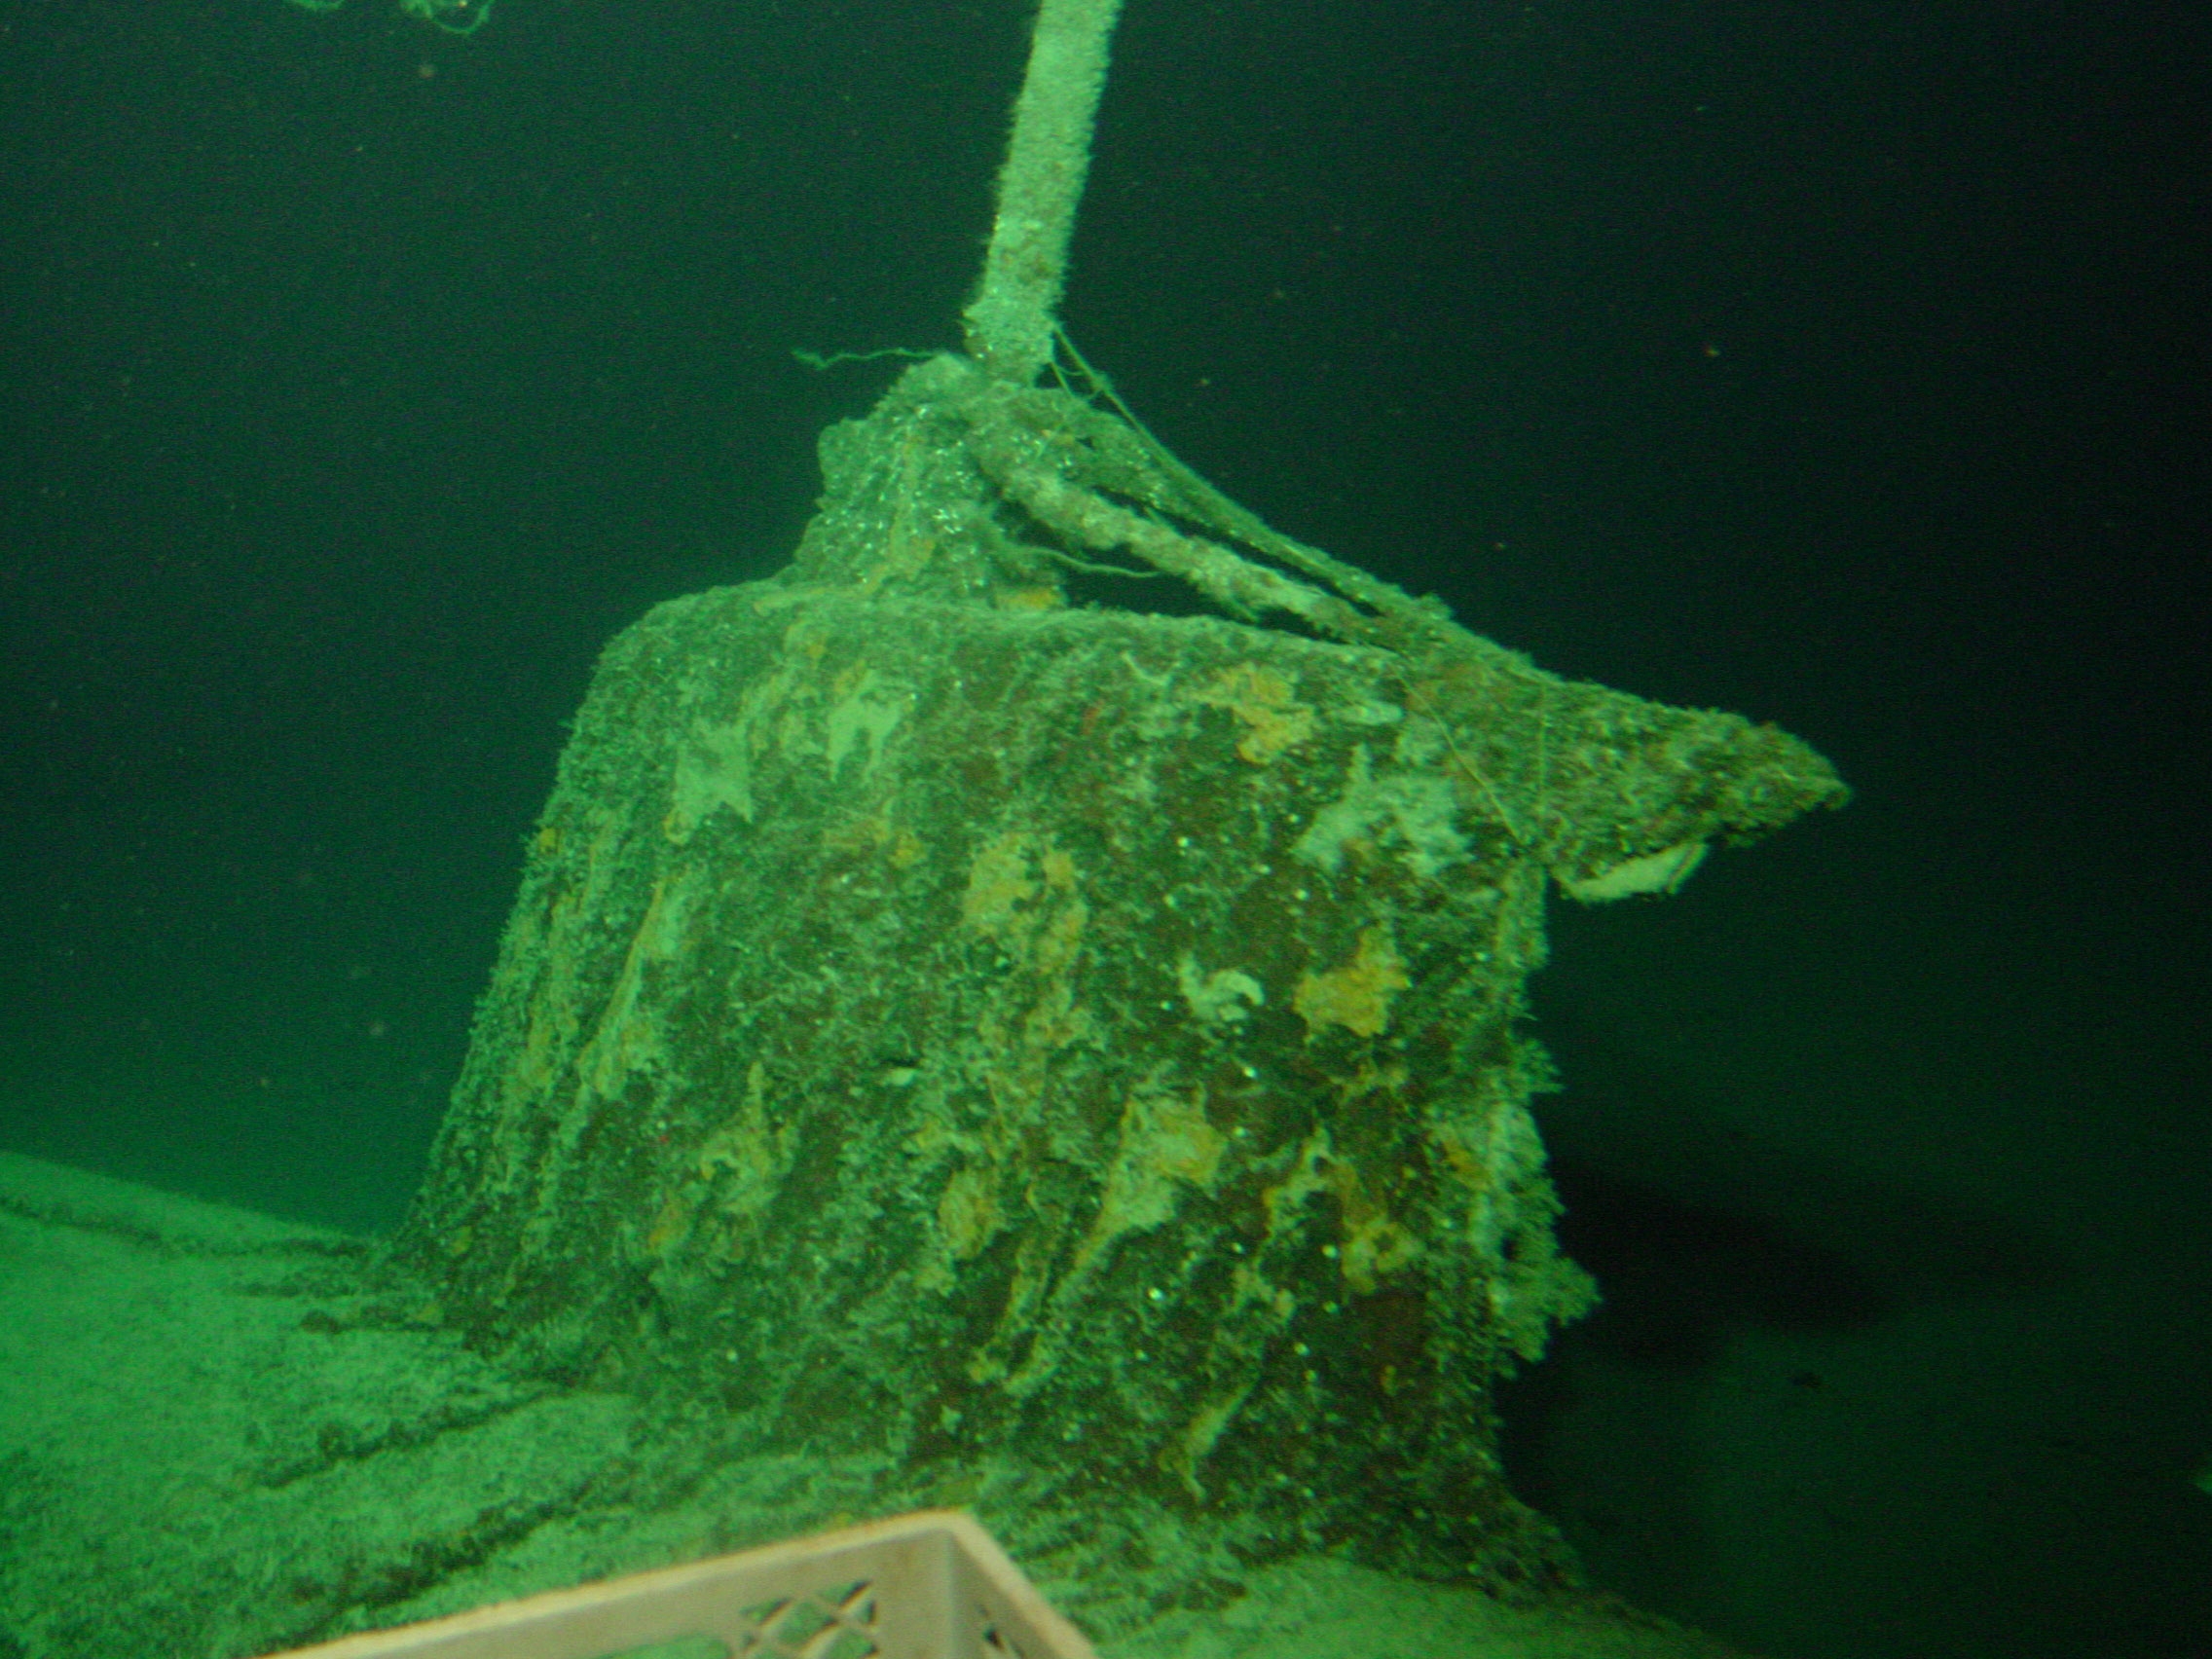 The conning tower of the mini submarine sunk by the USS Ward Credit: University of Hawaiʻi/HURL